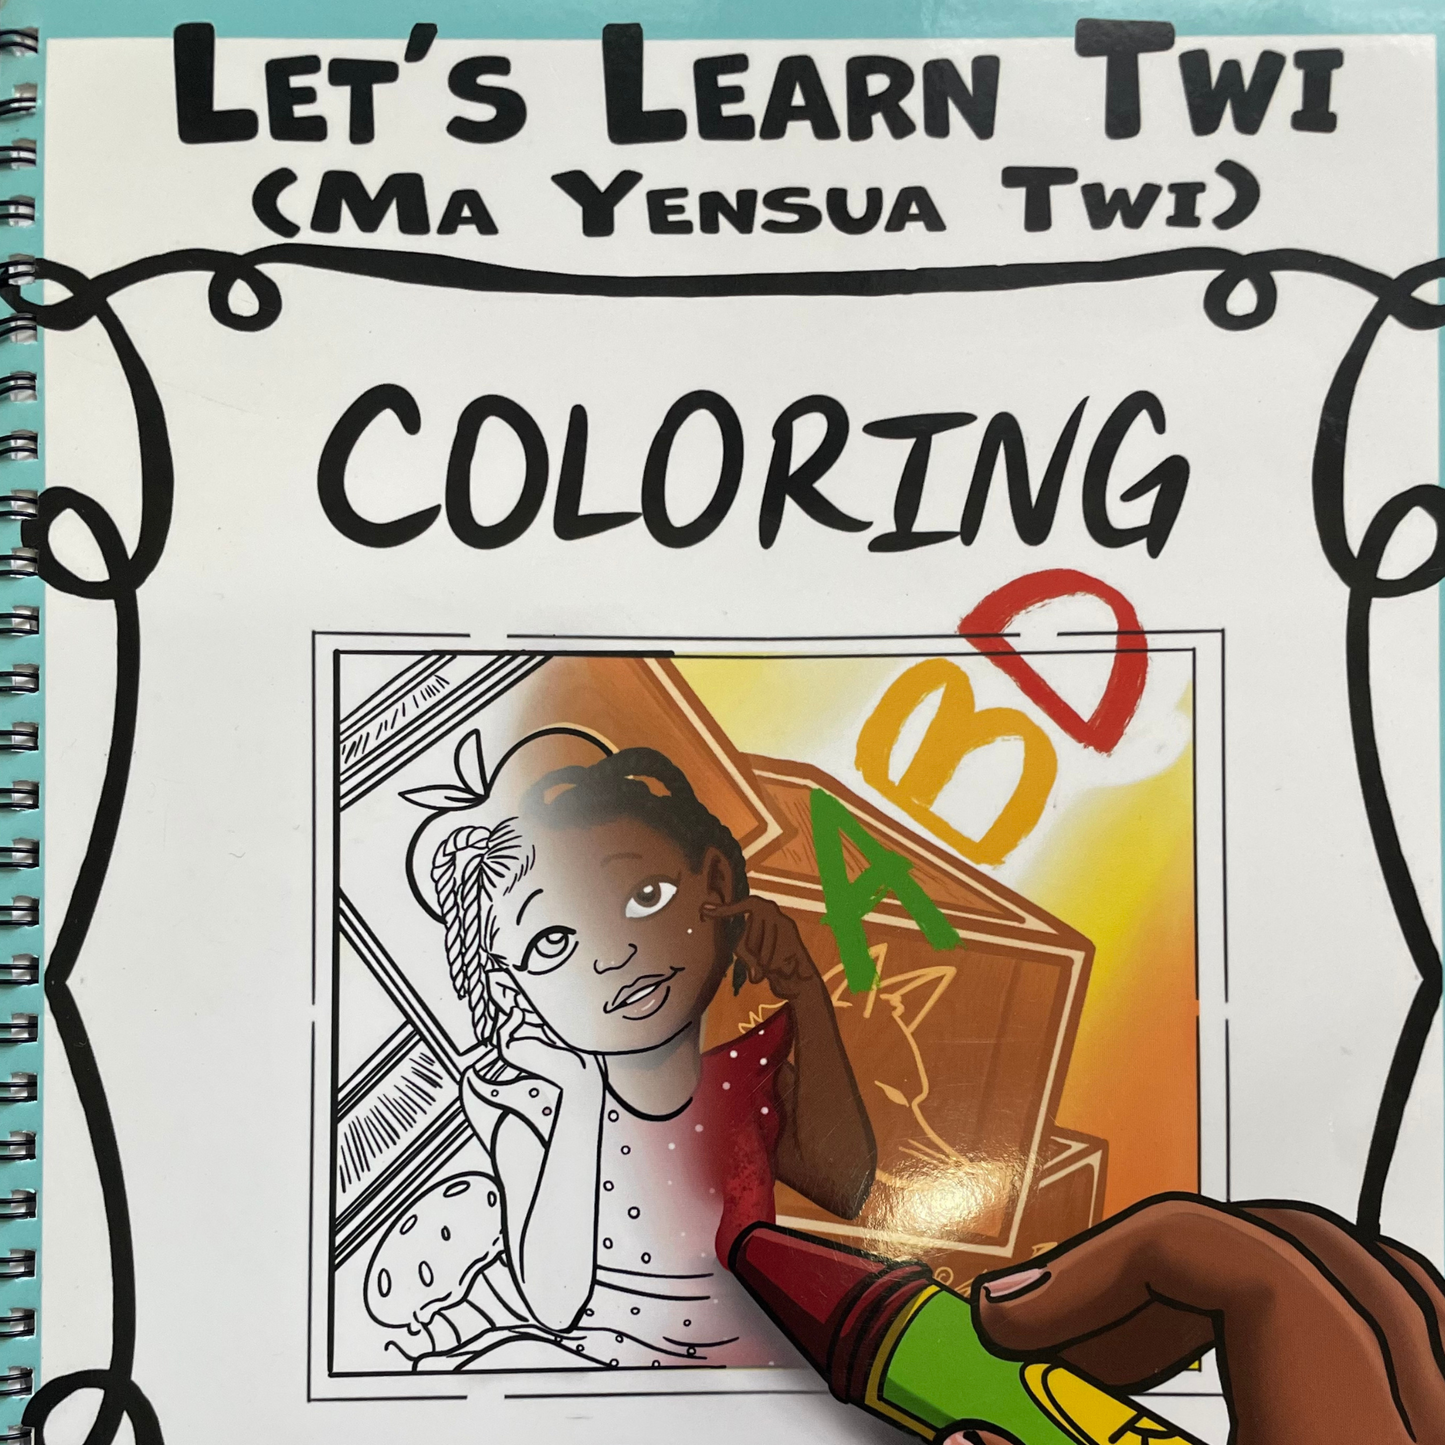 Let's Learn Twi Coloring Book (Alphabet Edition)